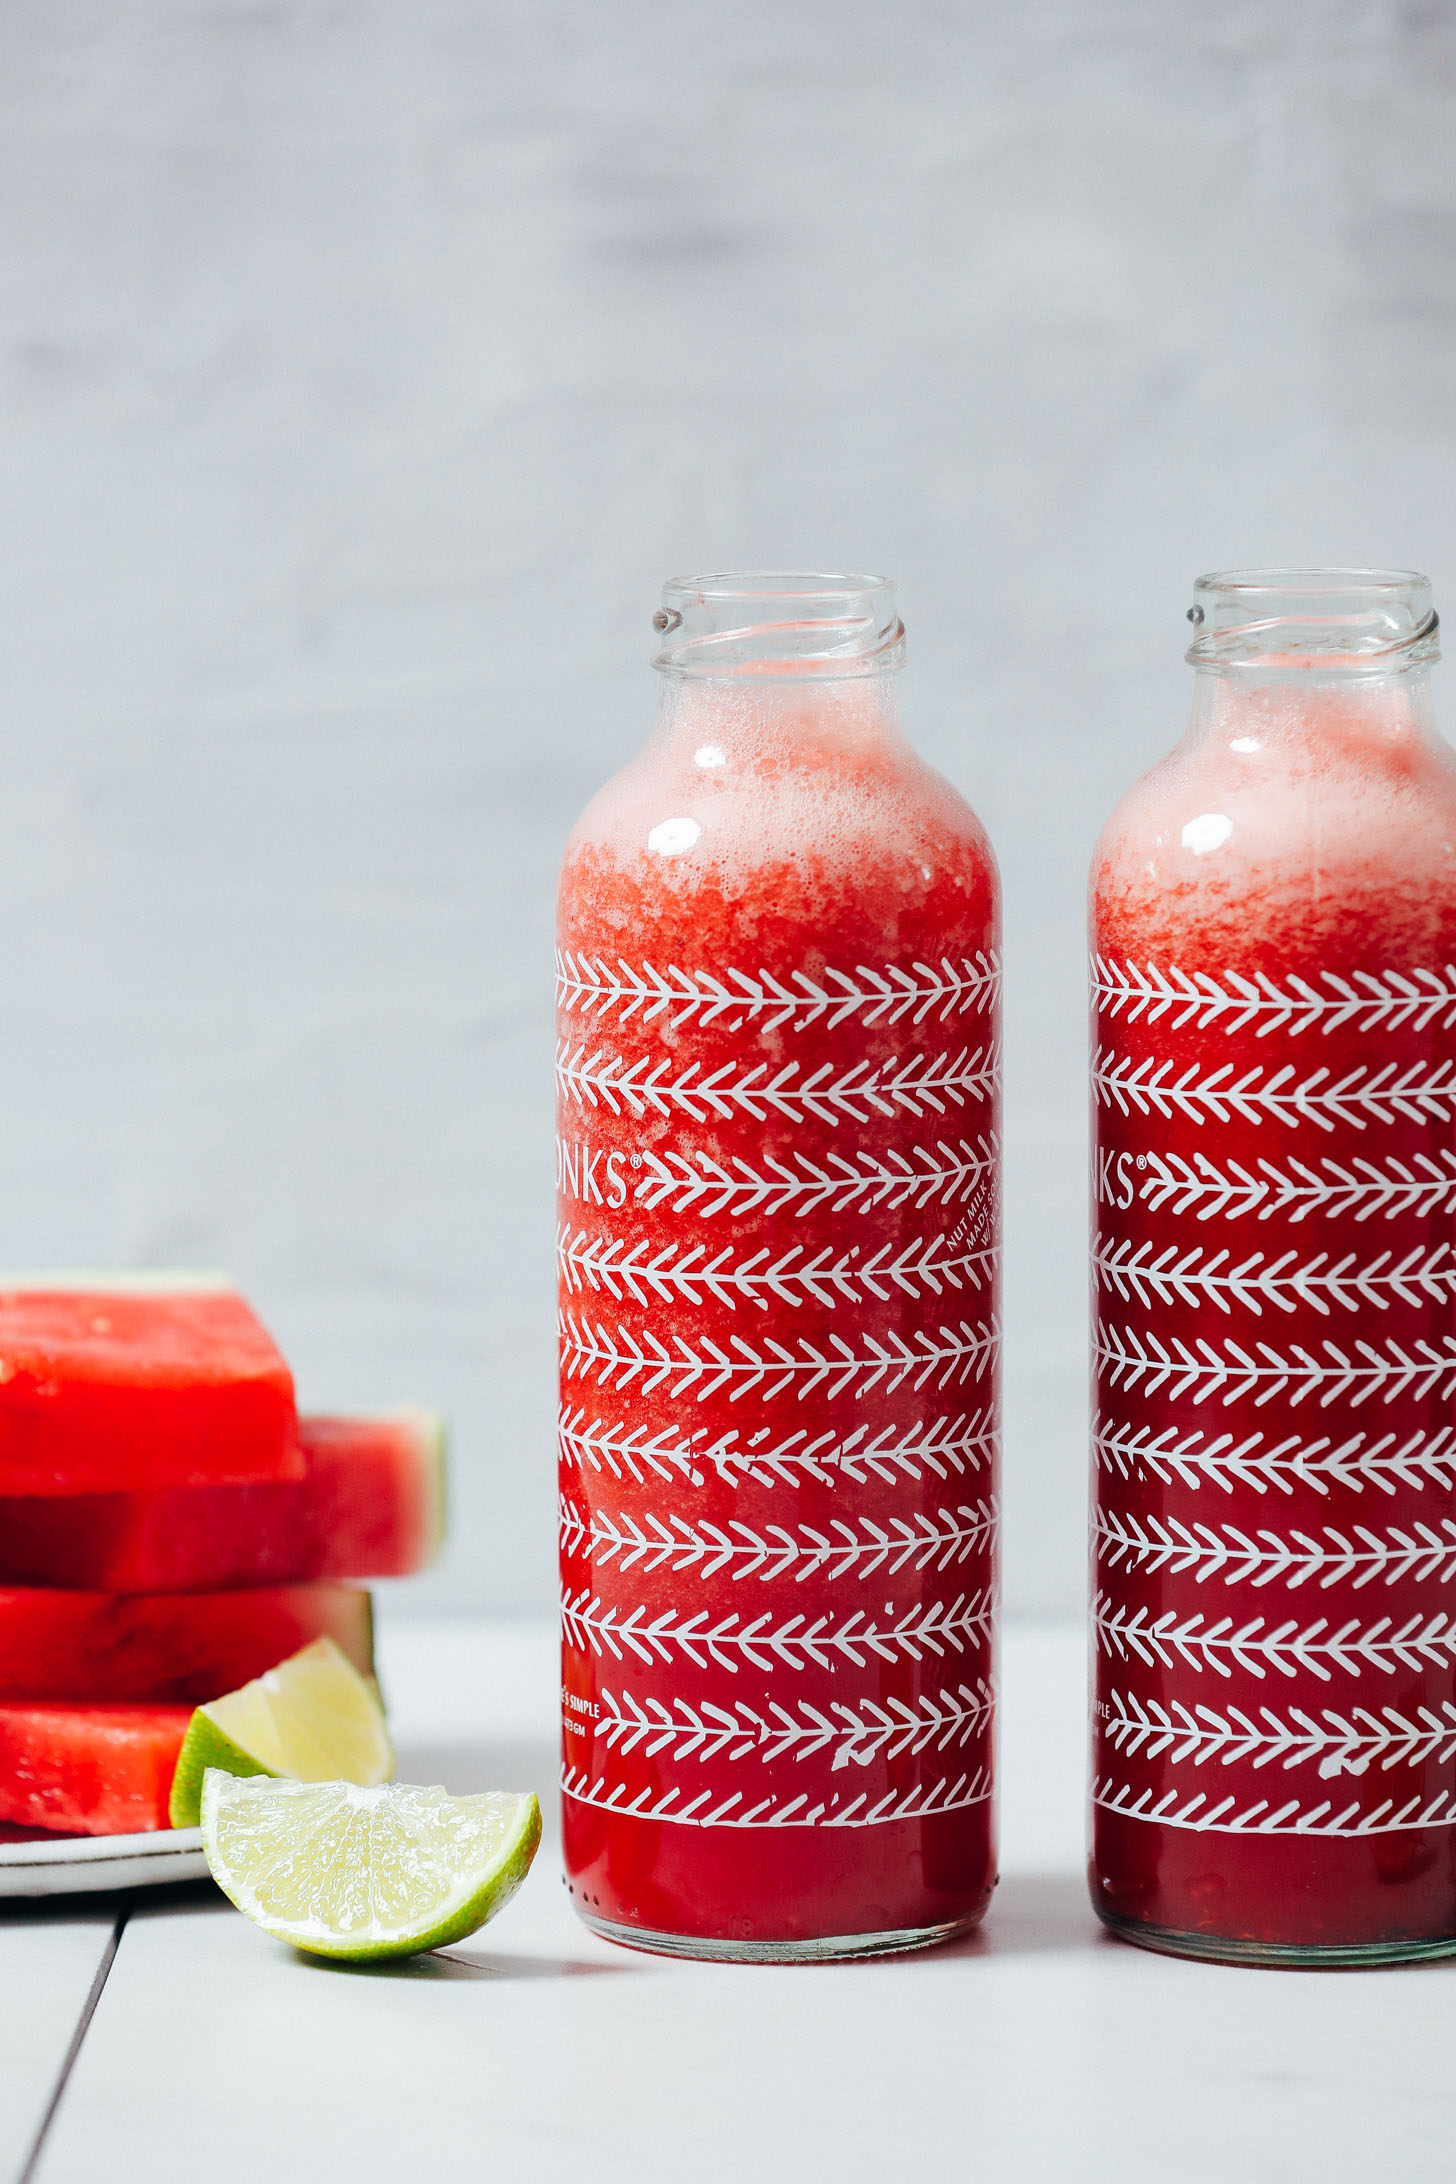 Stack of watermelon slices next to watermelon juice jars and lime wedges